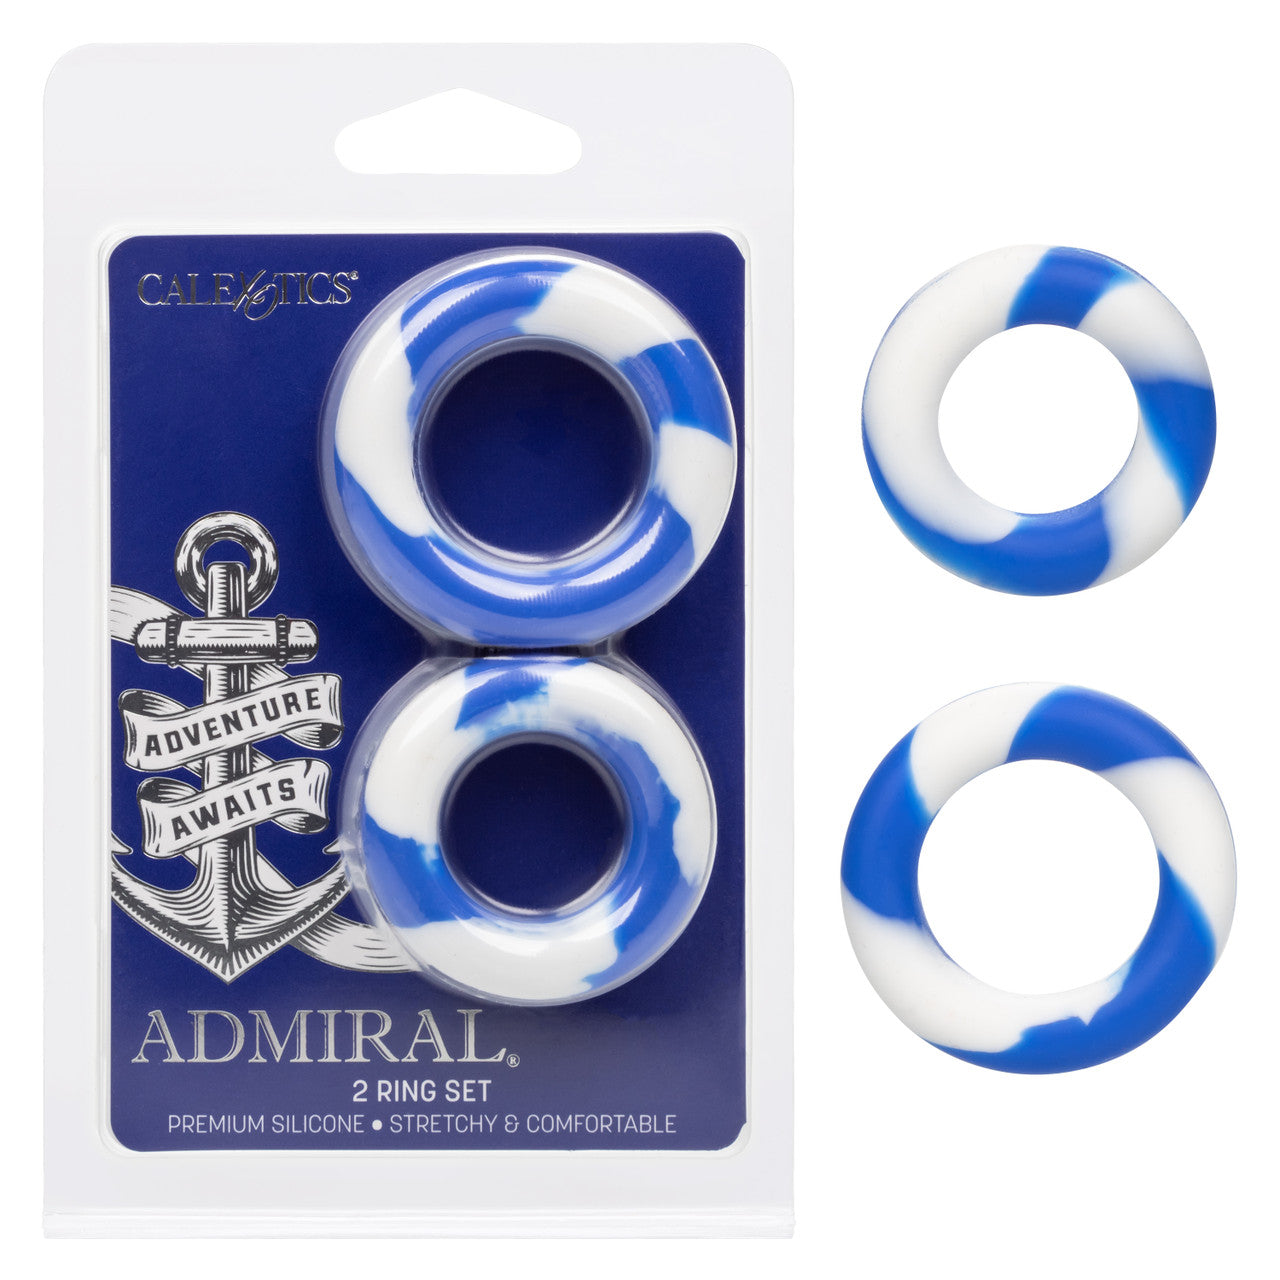 Admiral 2 Ring Set - Thorn & Feather